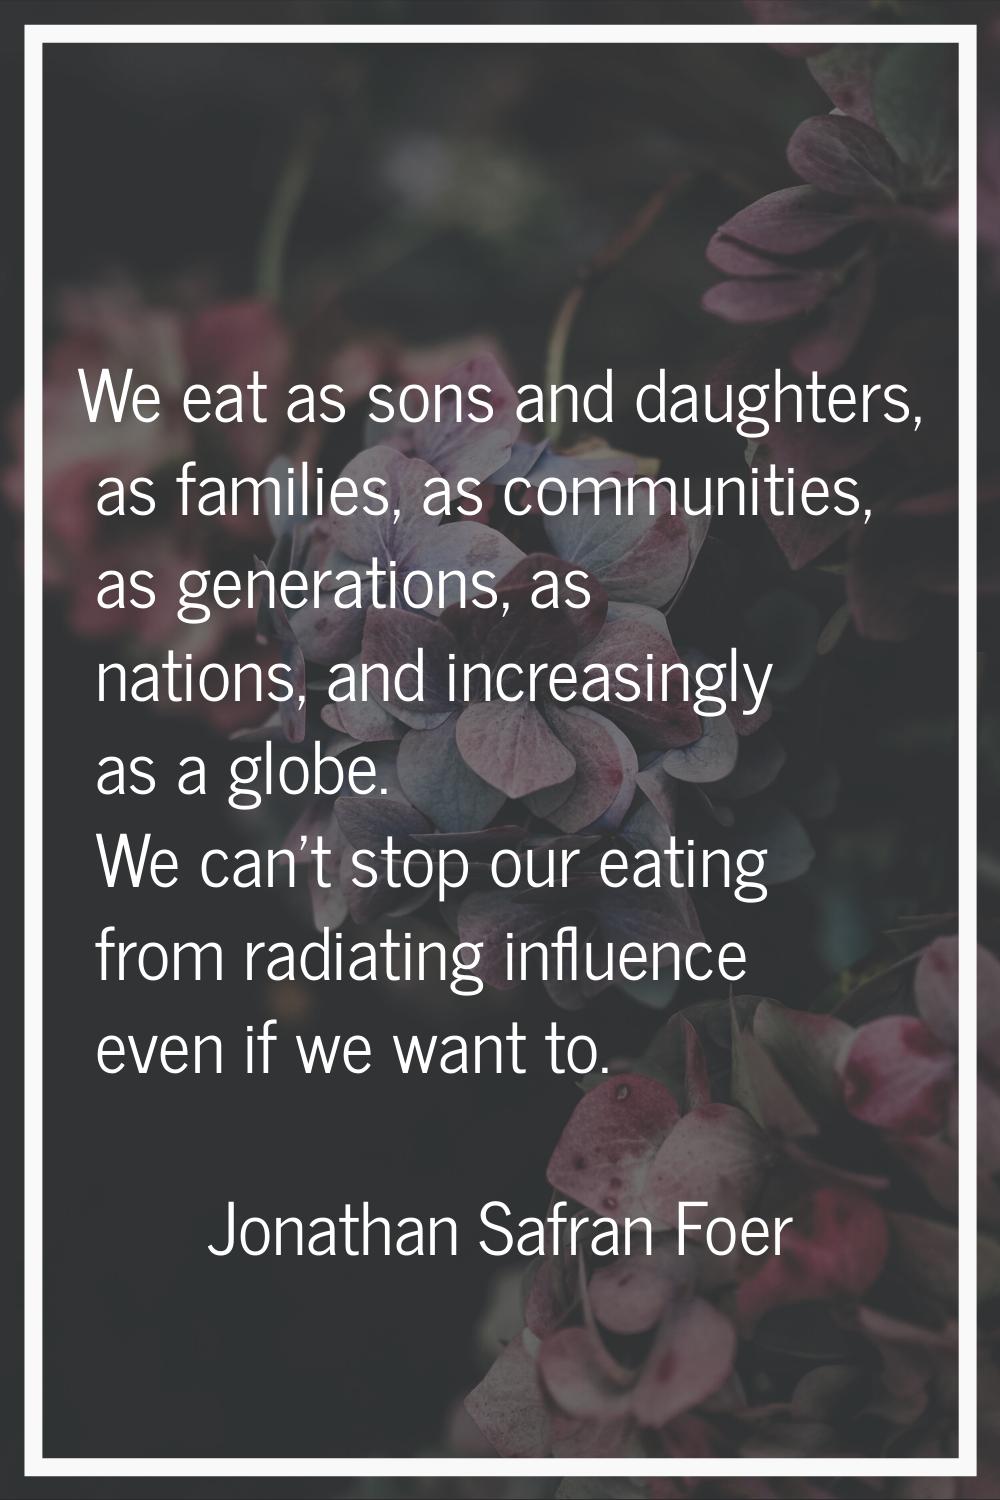 We eat as sons and daughters, as families, as communities, as generations, as nations, and increasi